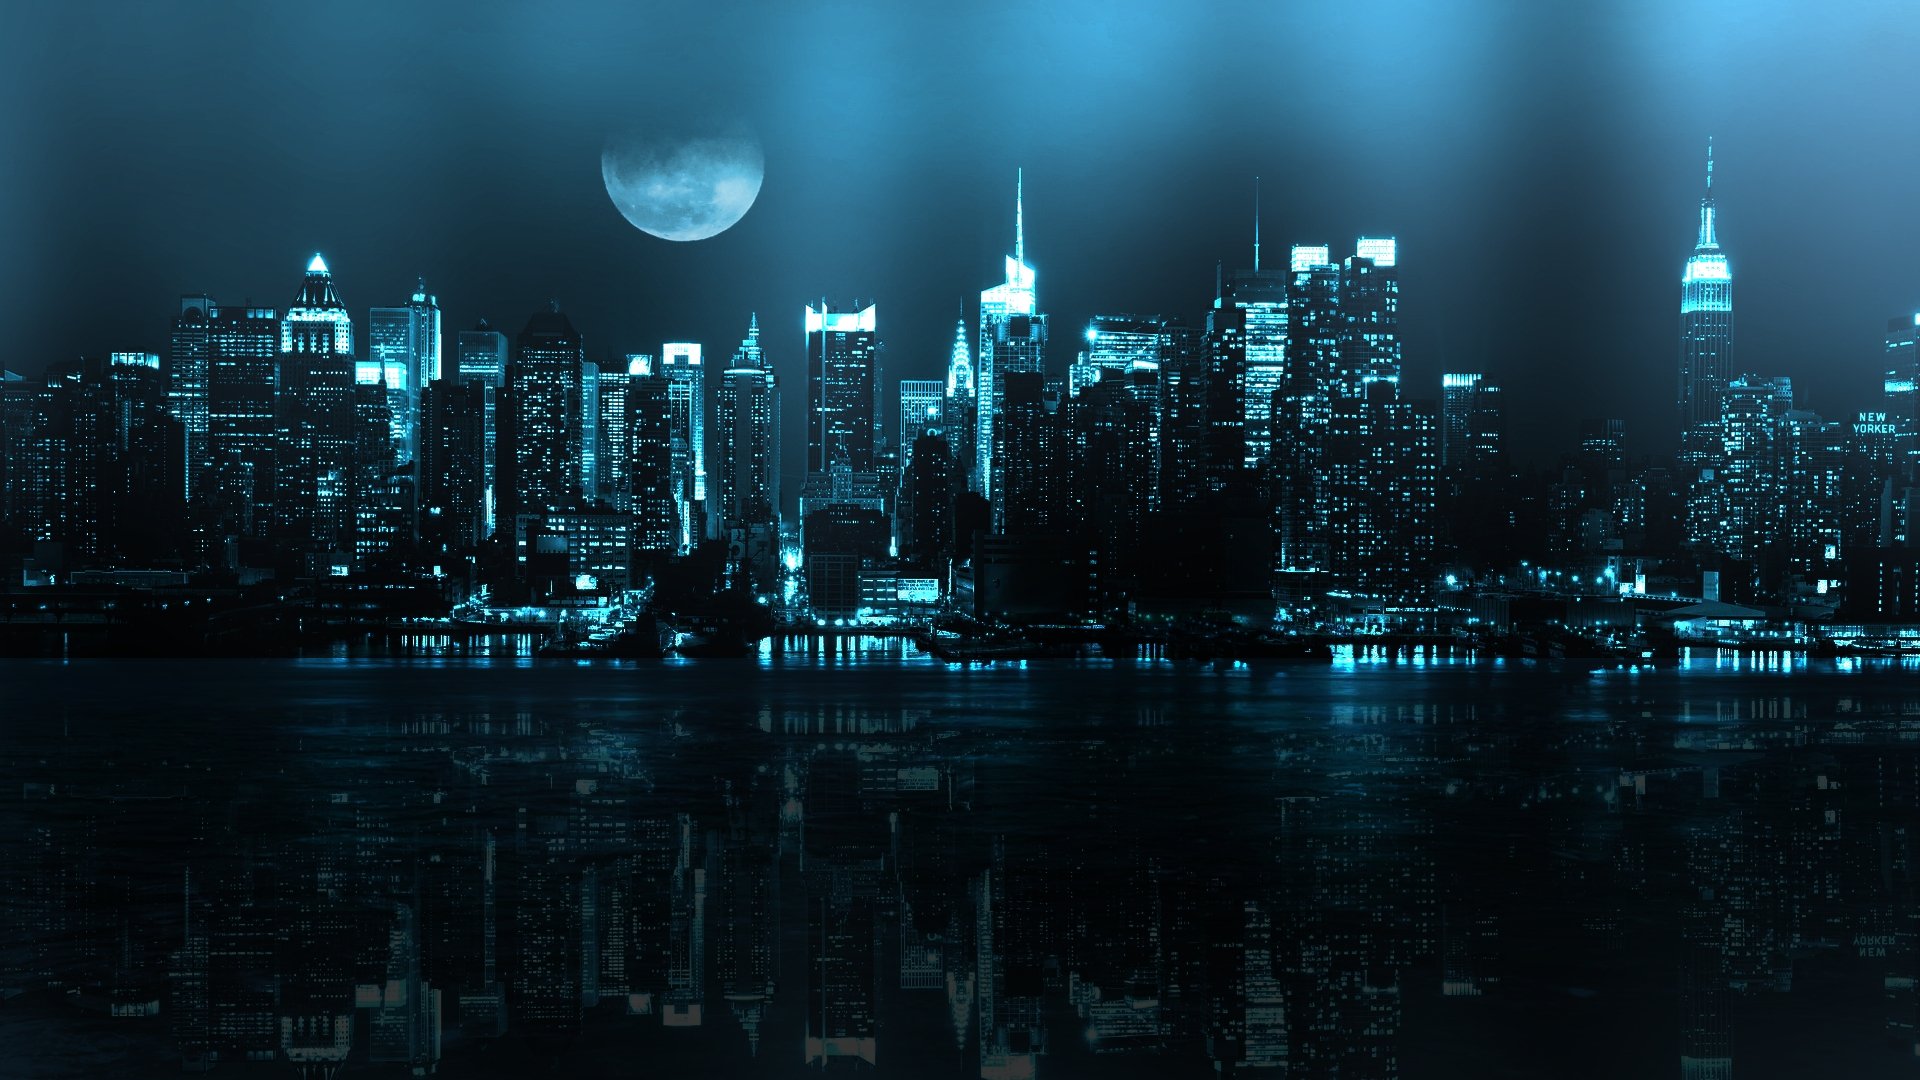 Cool Wallpapers 1920x1080 with City Light at Night HD Wallpapers for